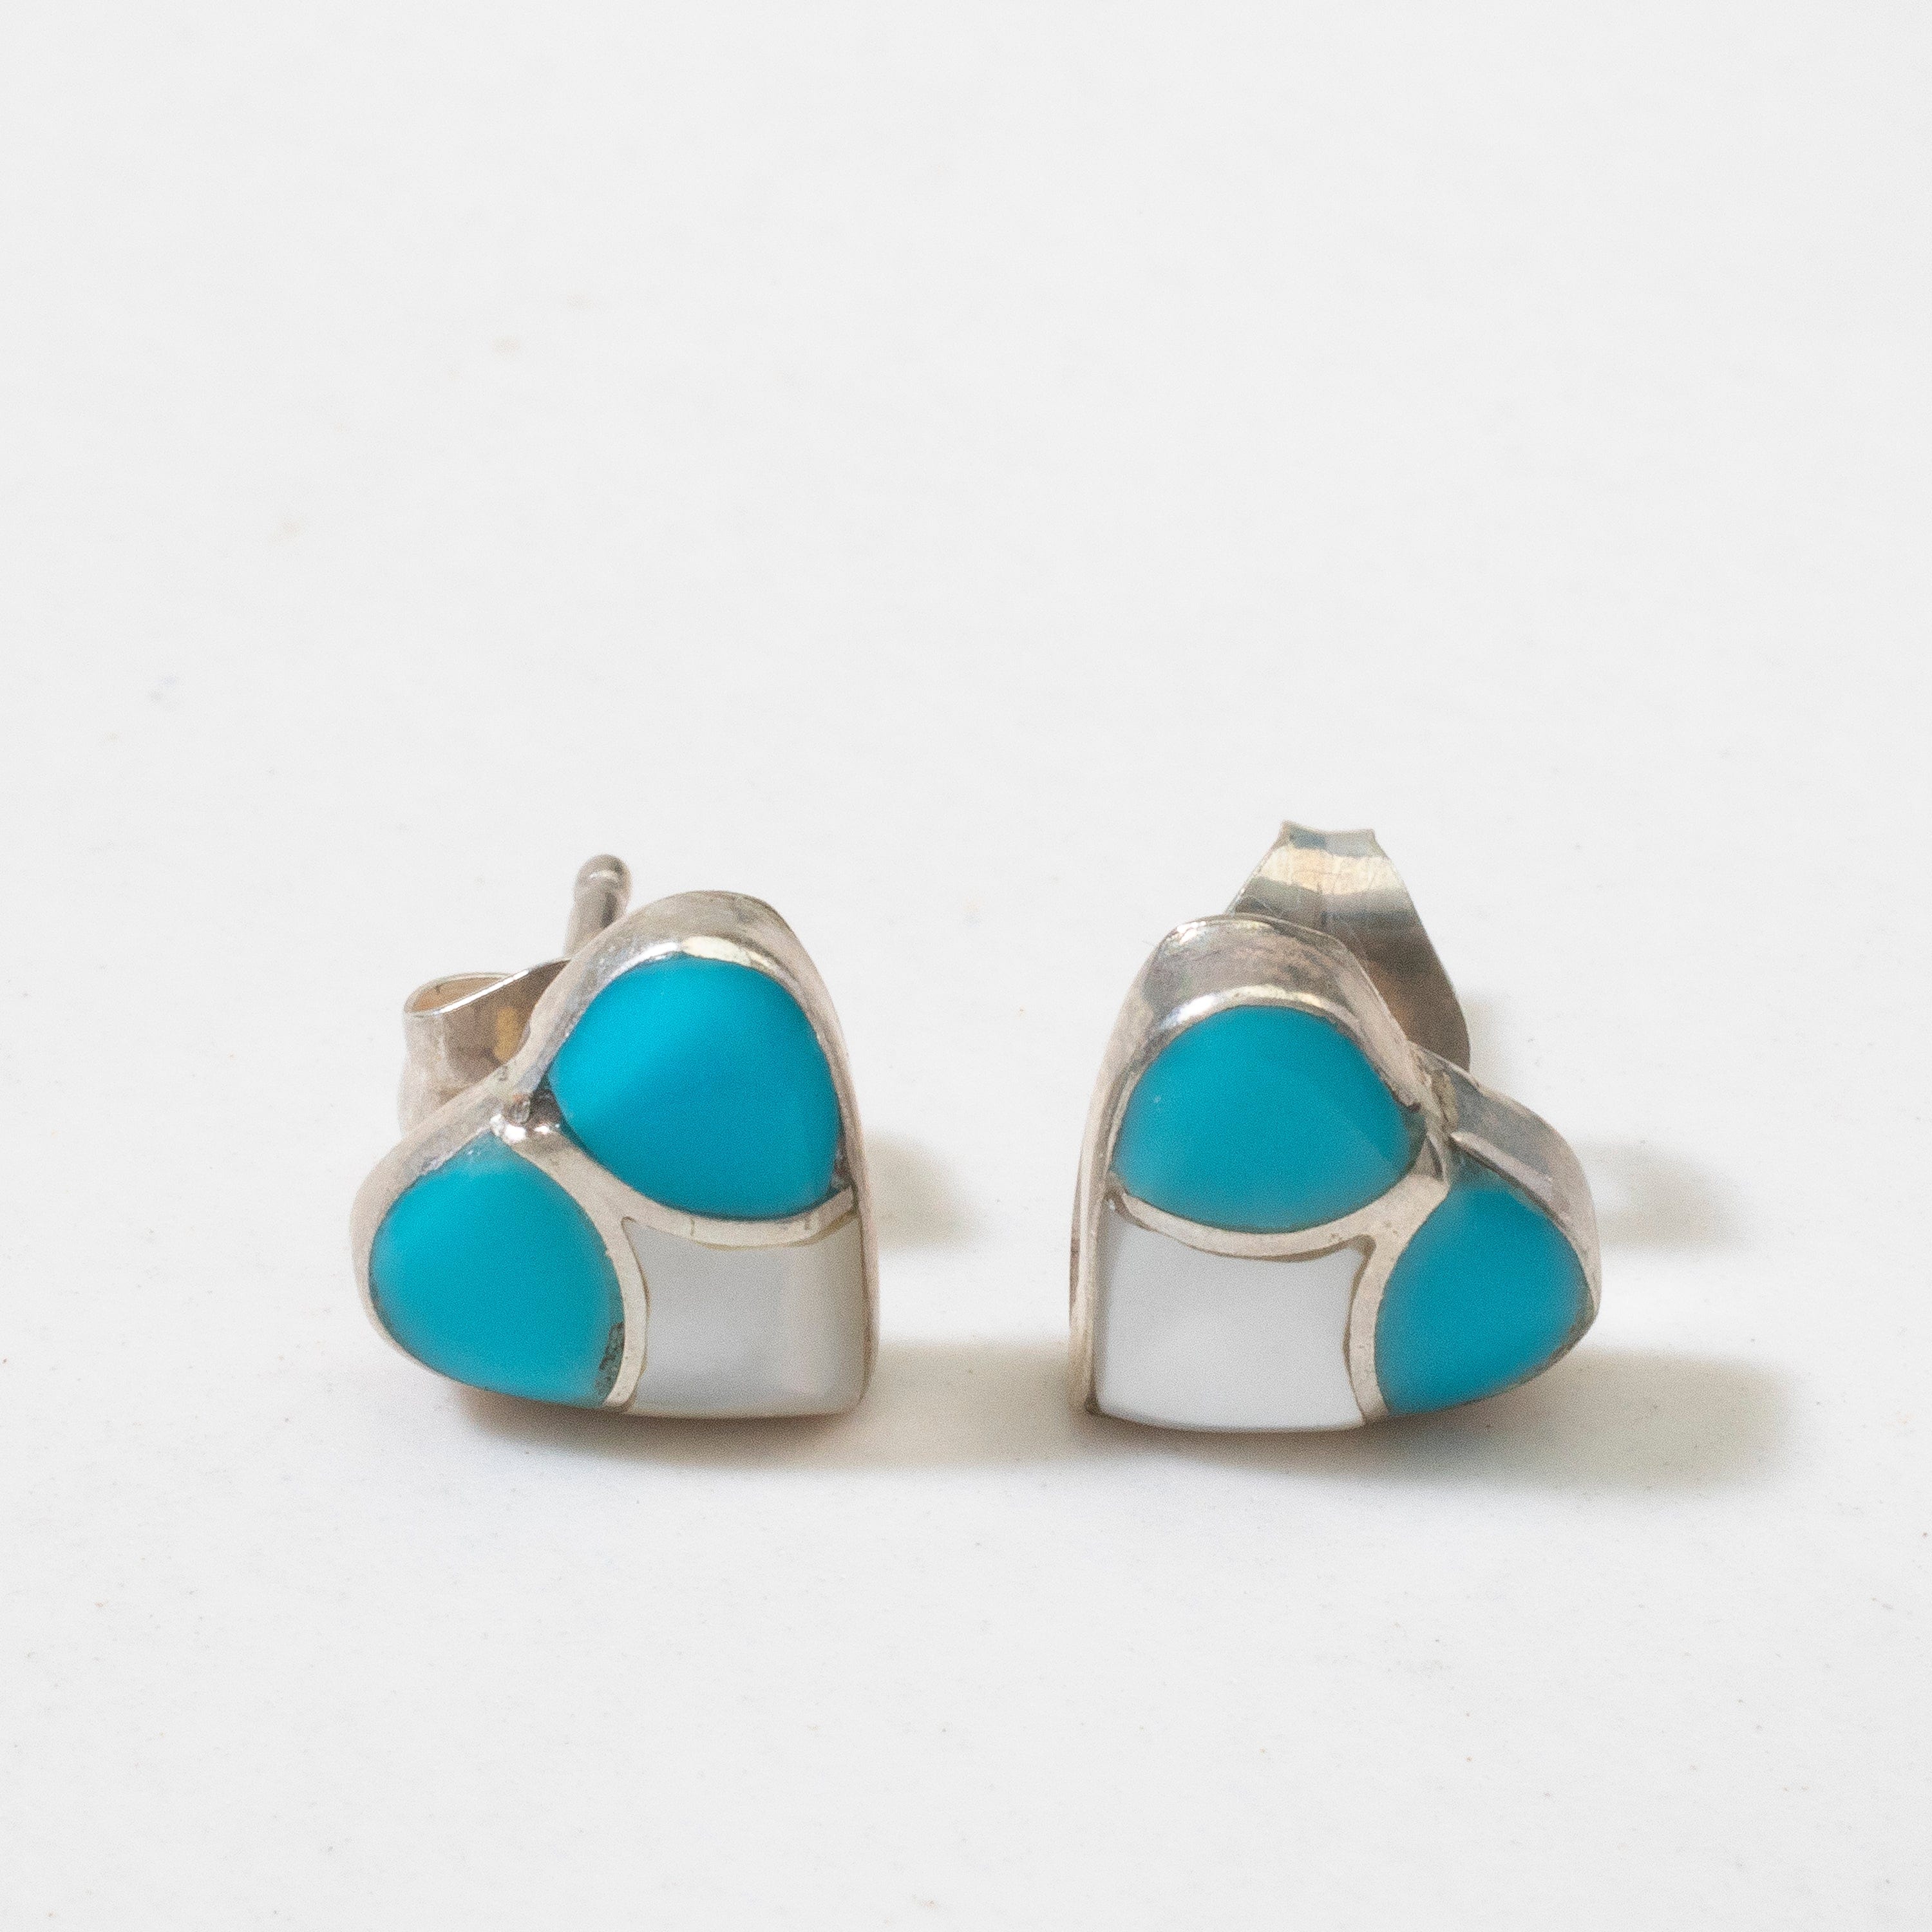 Kalifano Native American Jewelry Sleeping Beauty Turquoise & Mother of Pearl Heart Navajo USA Native American Made 925 Sterling Silver Earrings with Stud Backing NAE100.008